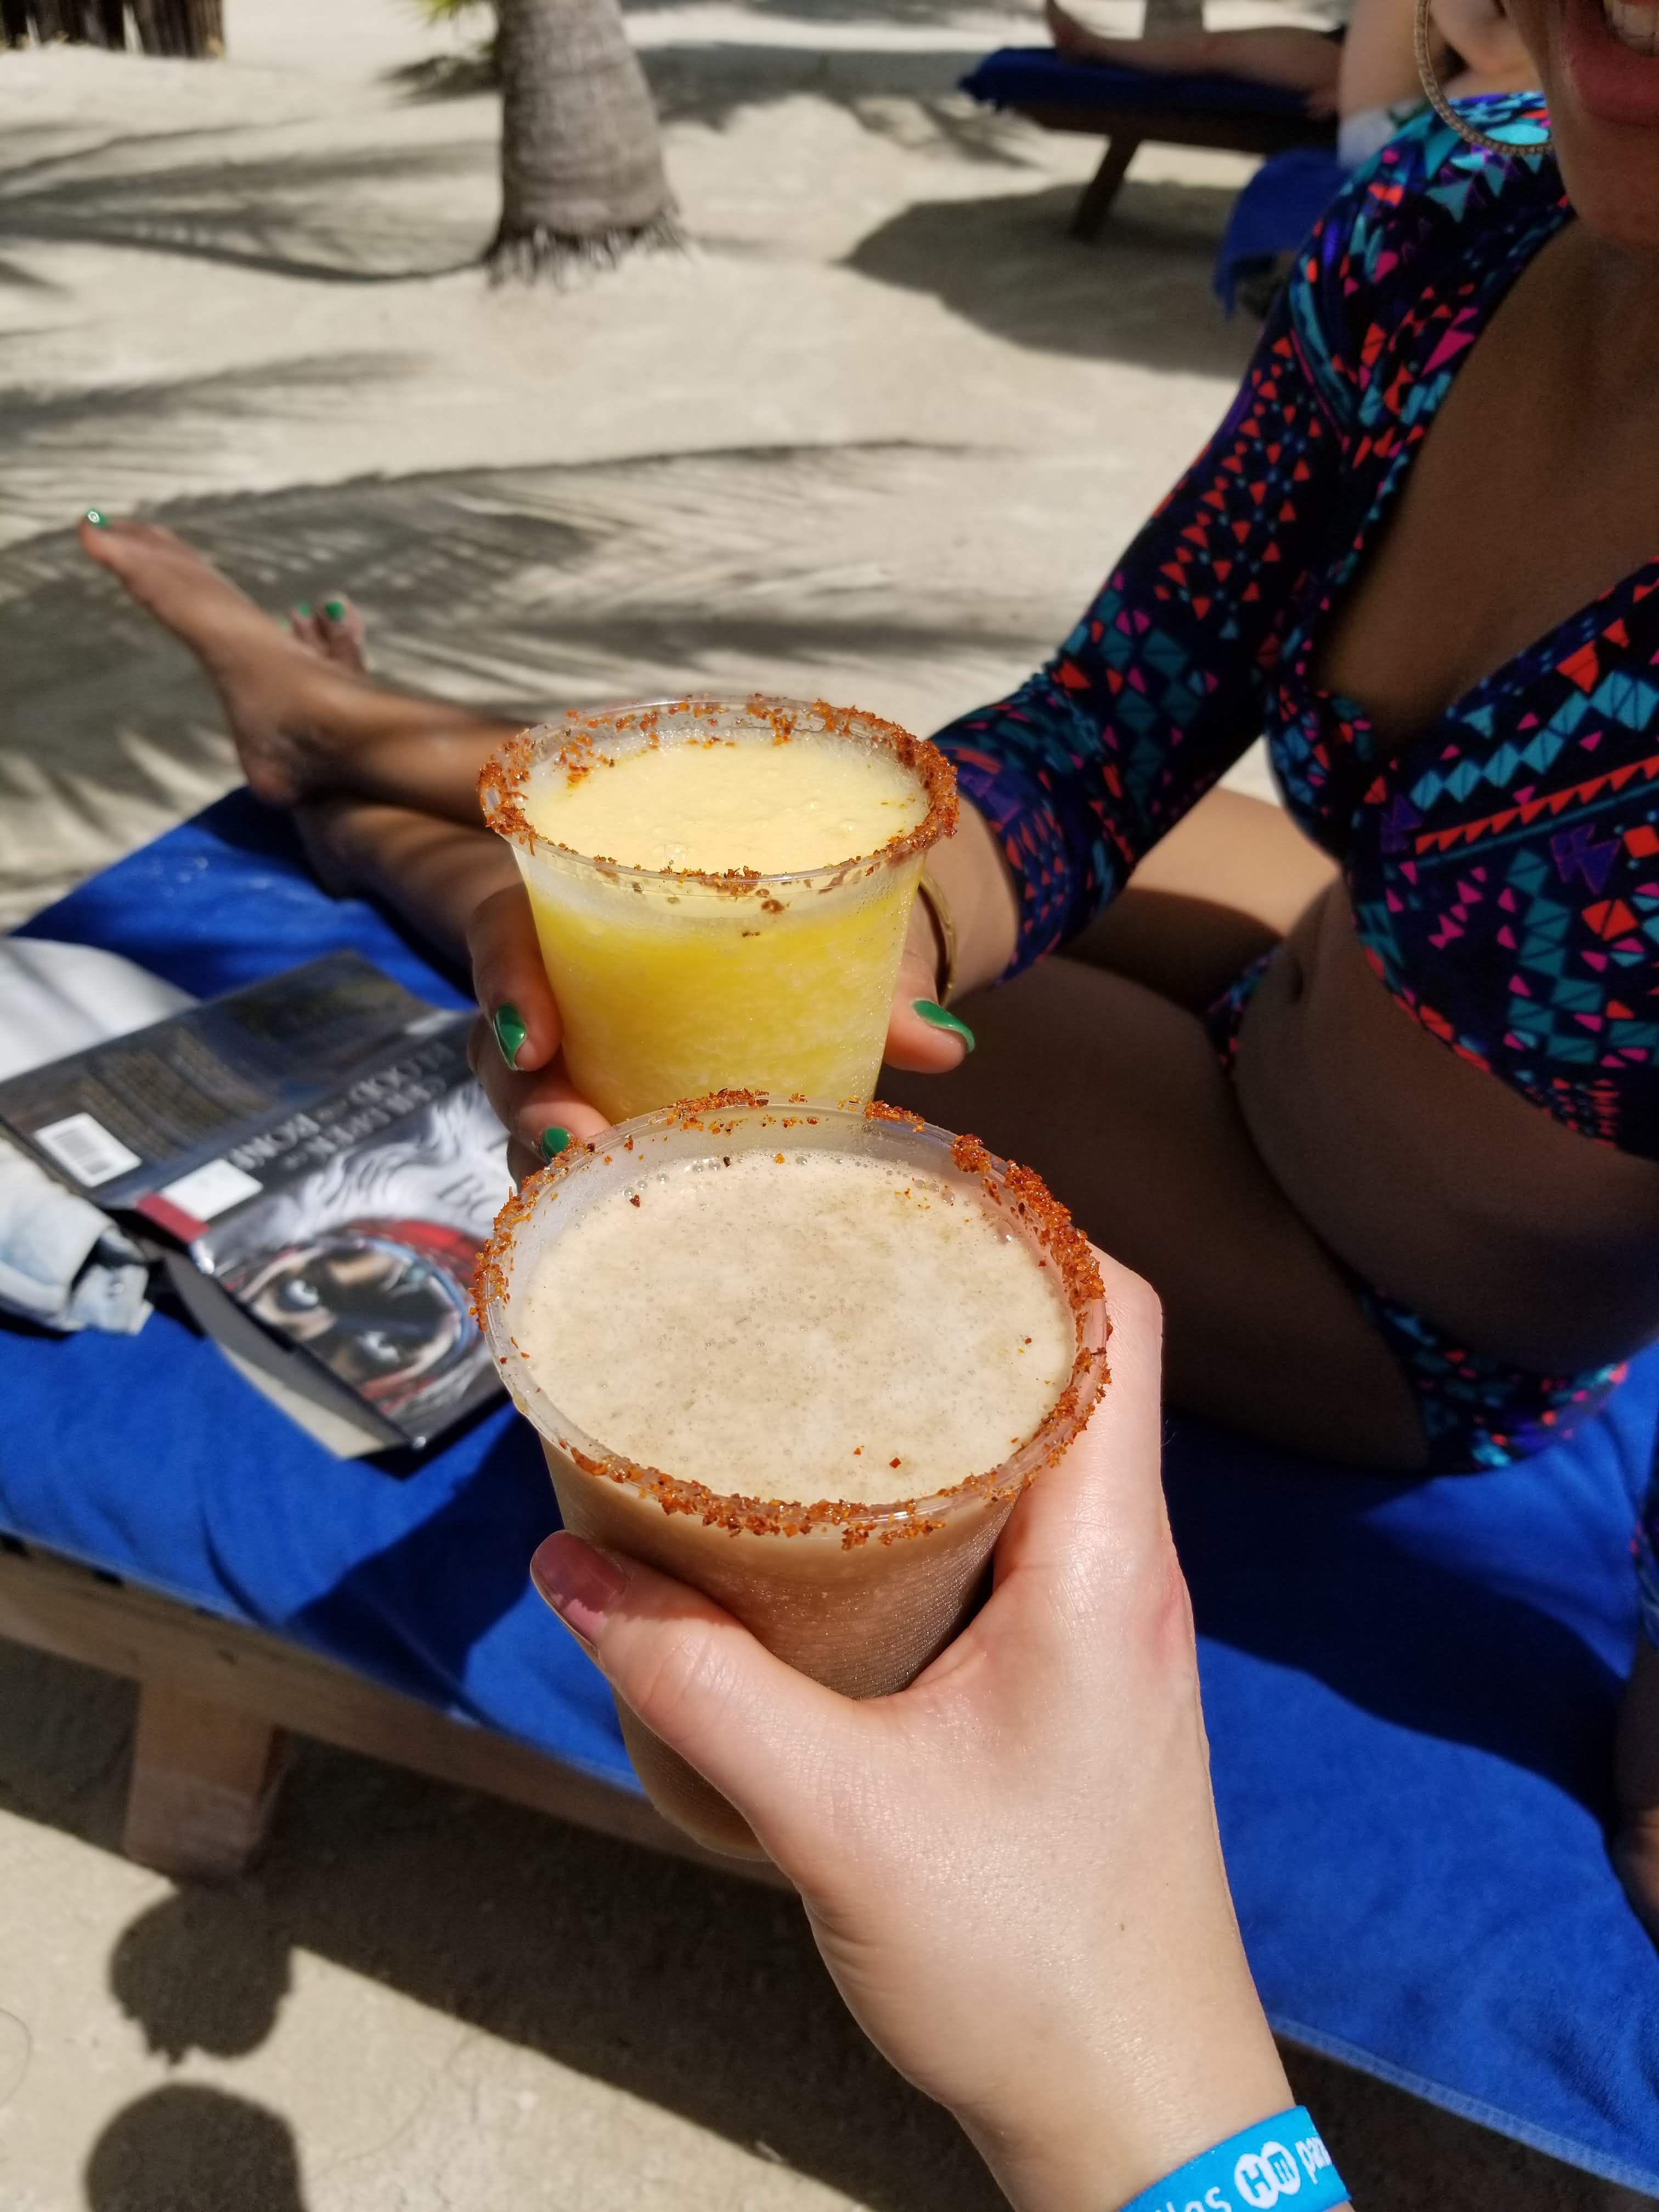 Two beautiful women are holding margaritas in plastic cups - one is a mango margarita the other is a tamarind margarita. In the background is the book Children of Blood and Bone.